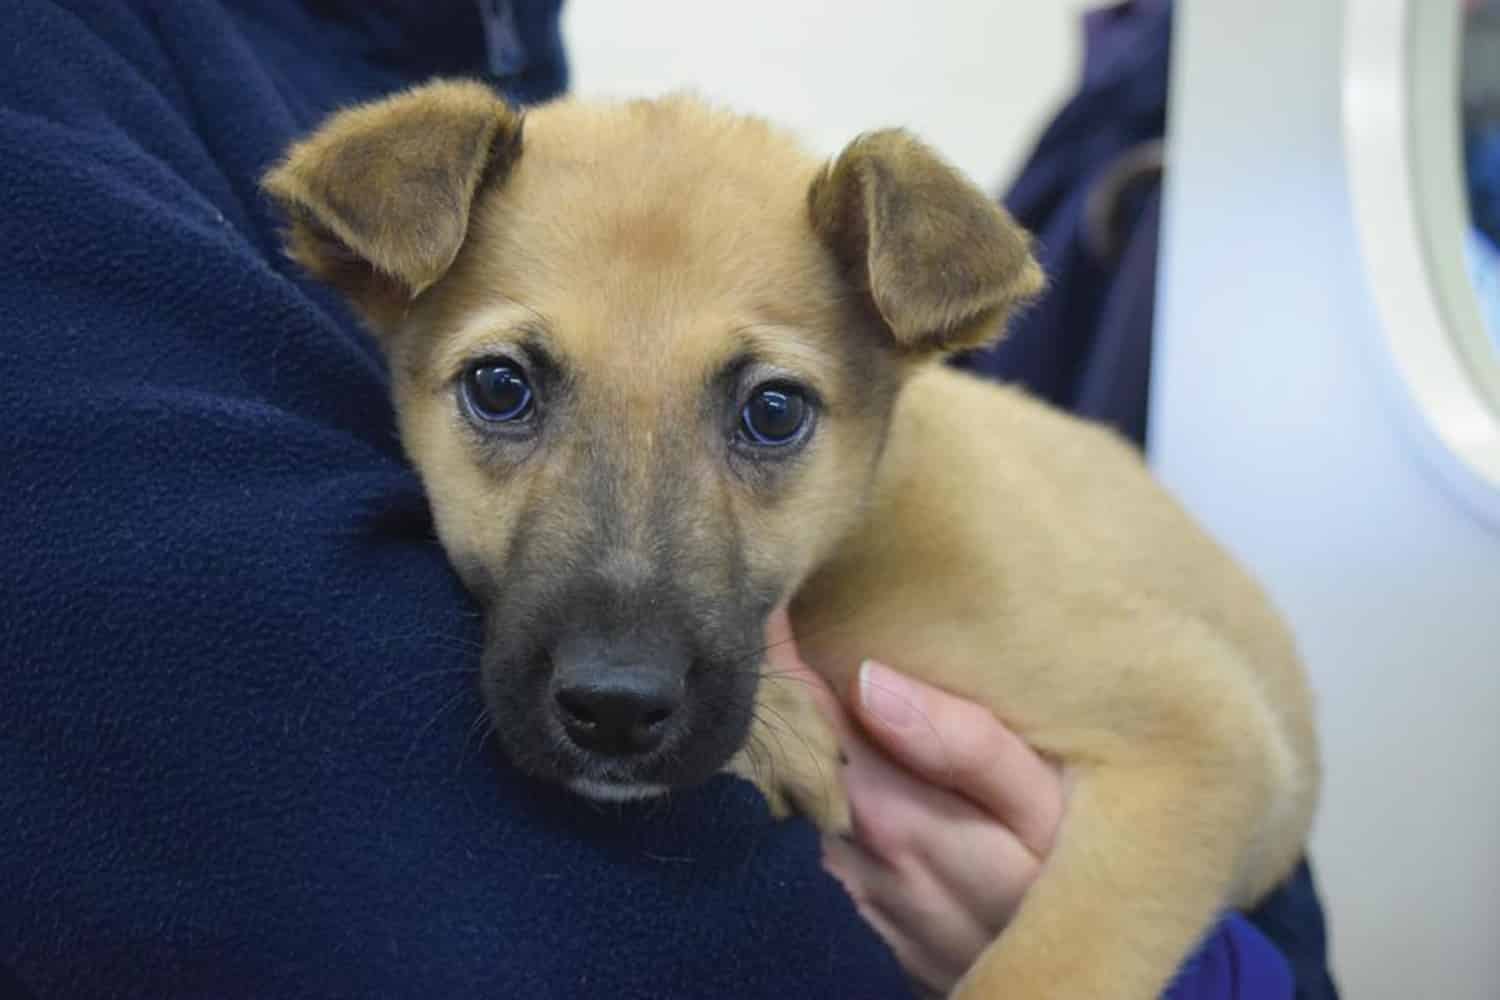 RESCUE CENTRE'S PLEA Battersea Dogs and Cats Home flooded with unwanted pets bought as Christmas presents from social media